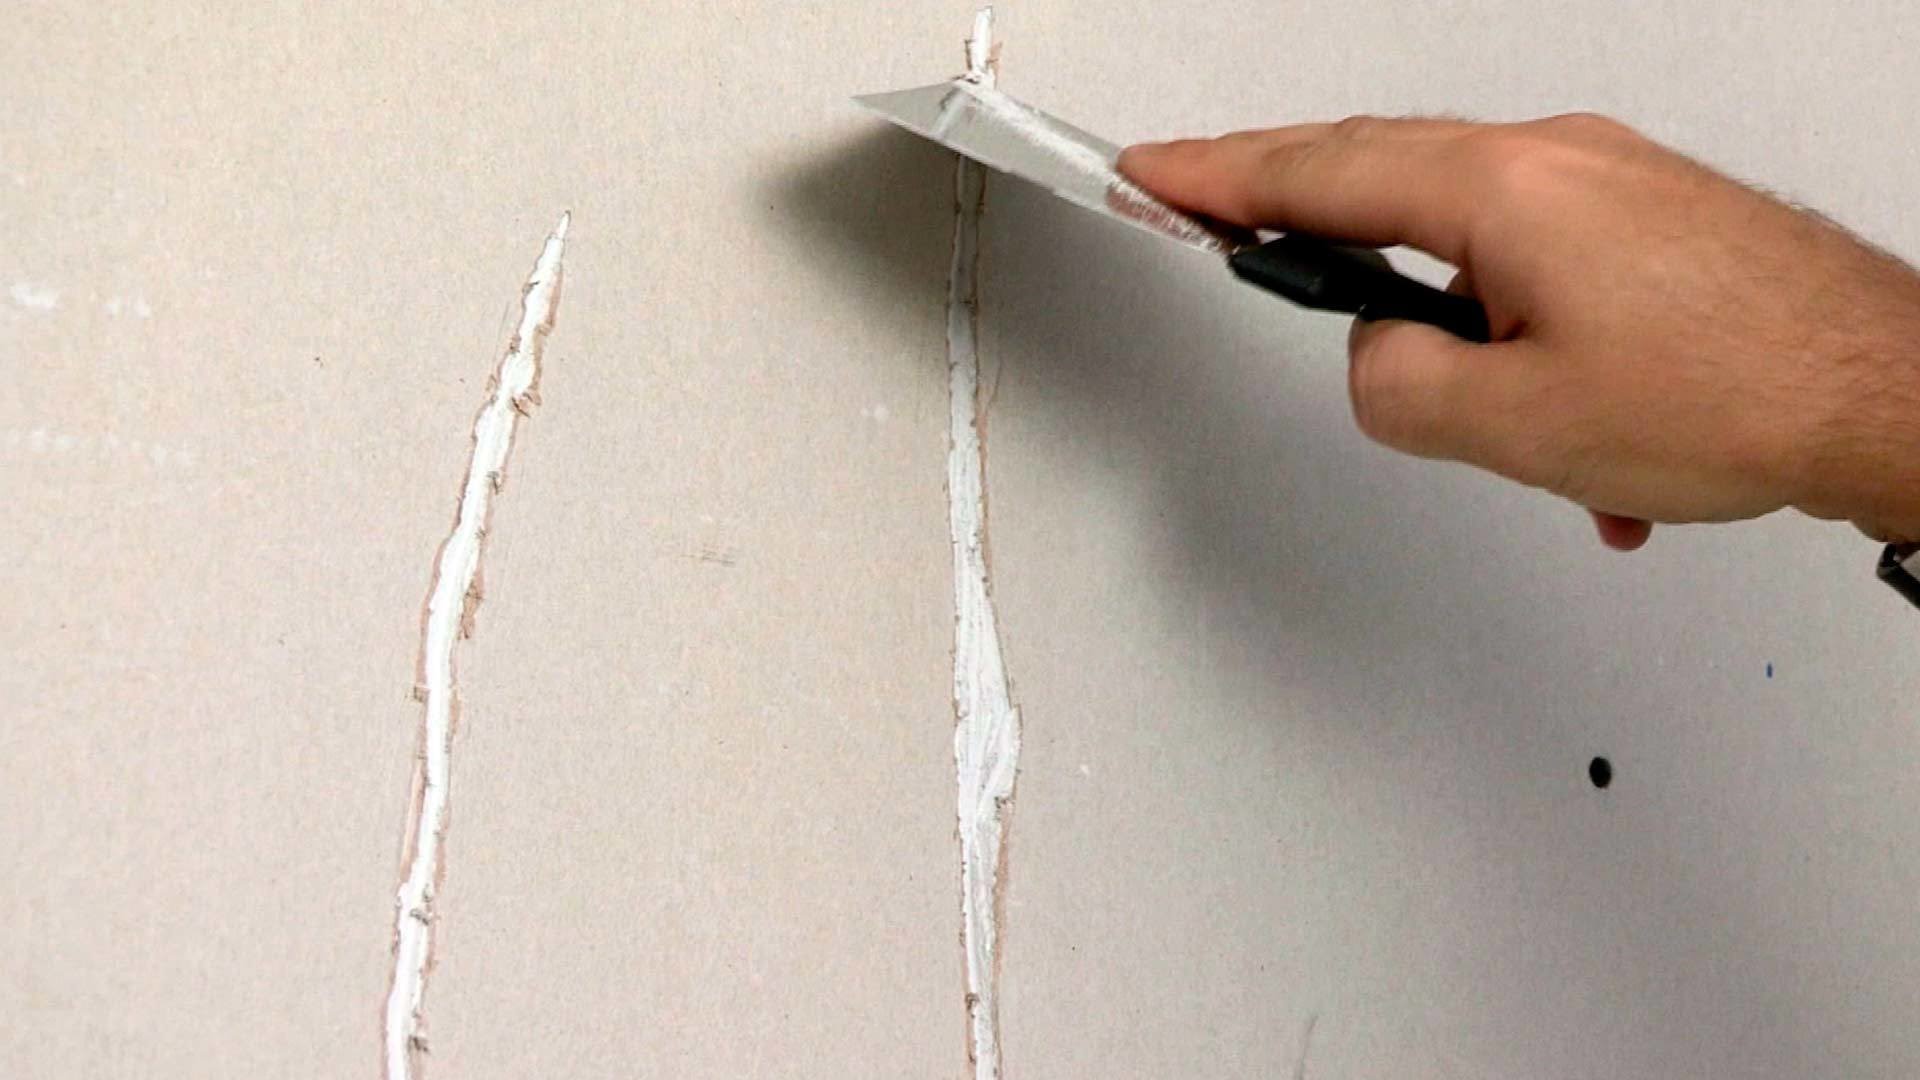 How to fix a hole in drywall on the wall? How to repair and how to